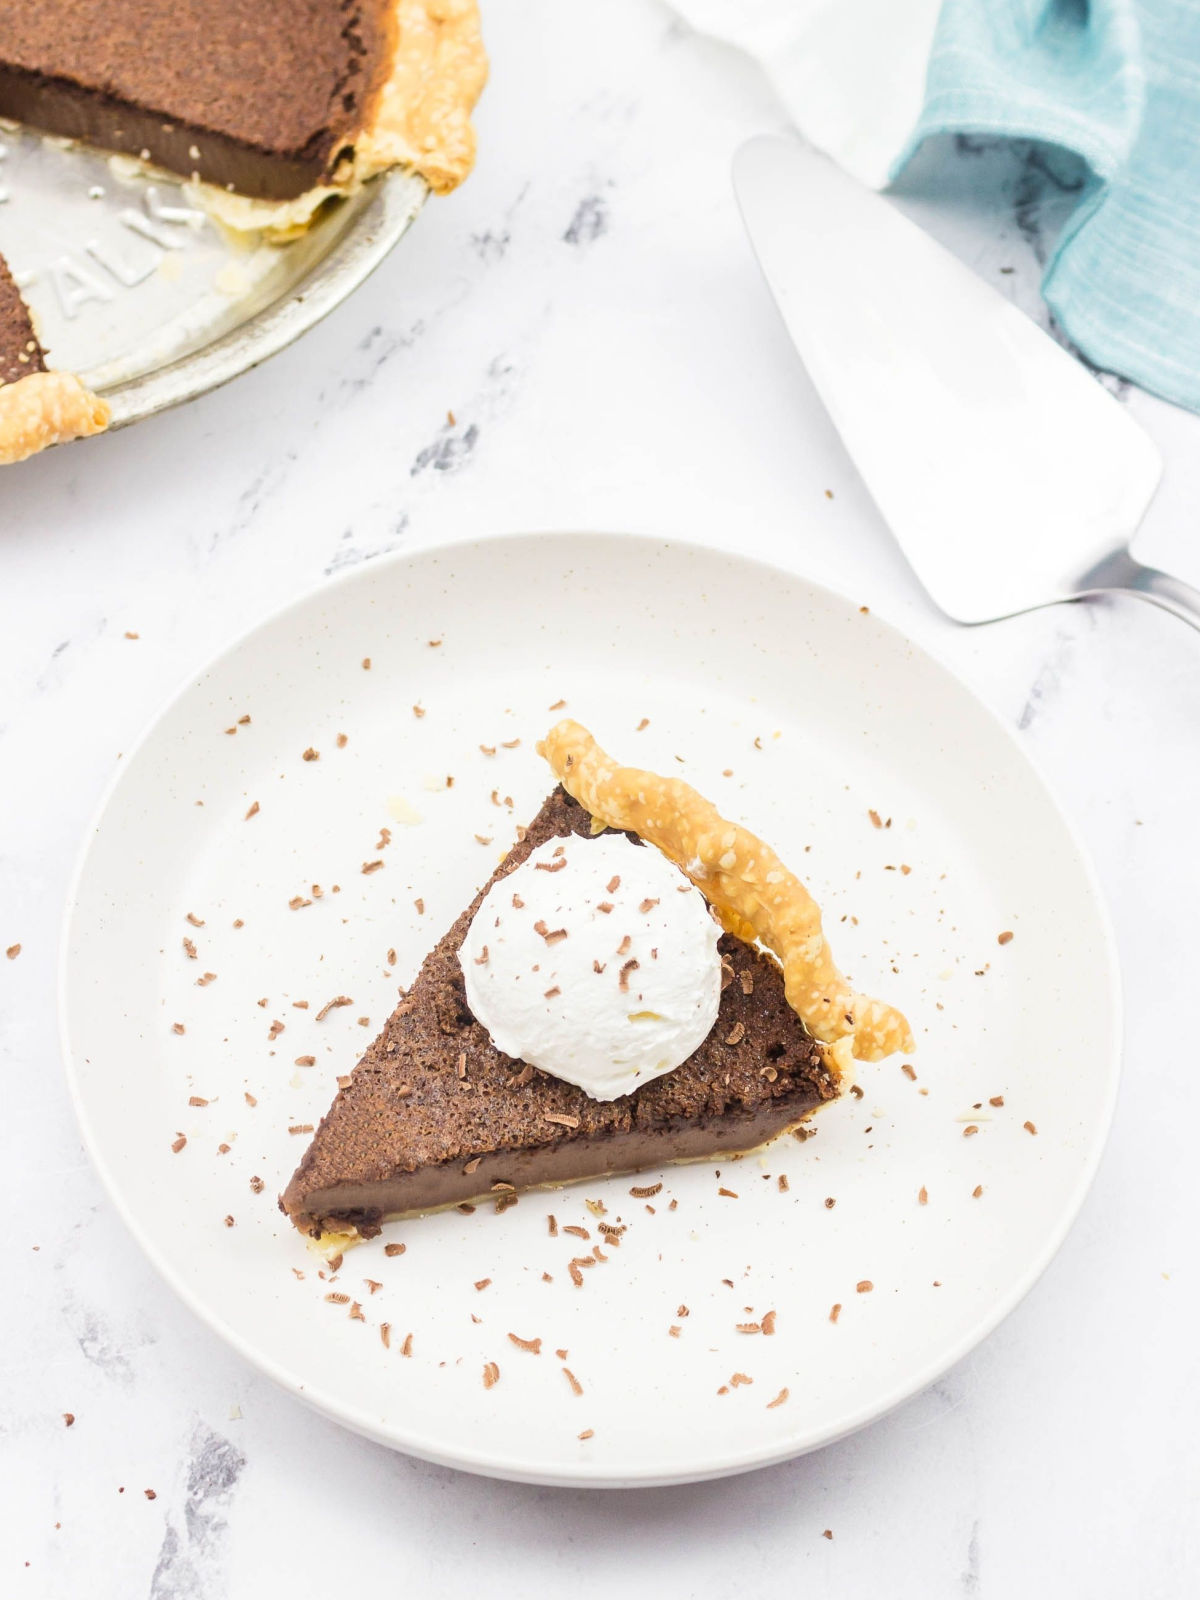 Slice of chocolate chess pie topped with whipped cream on a plate.